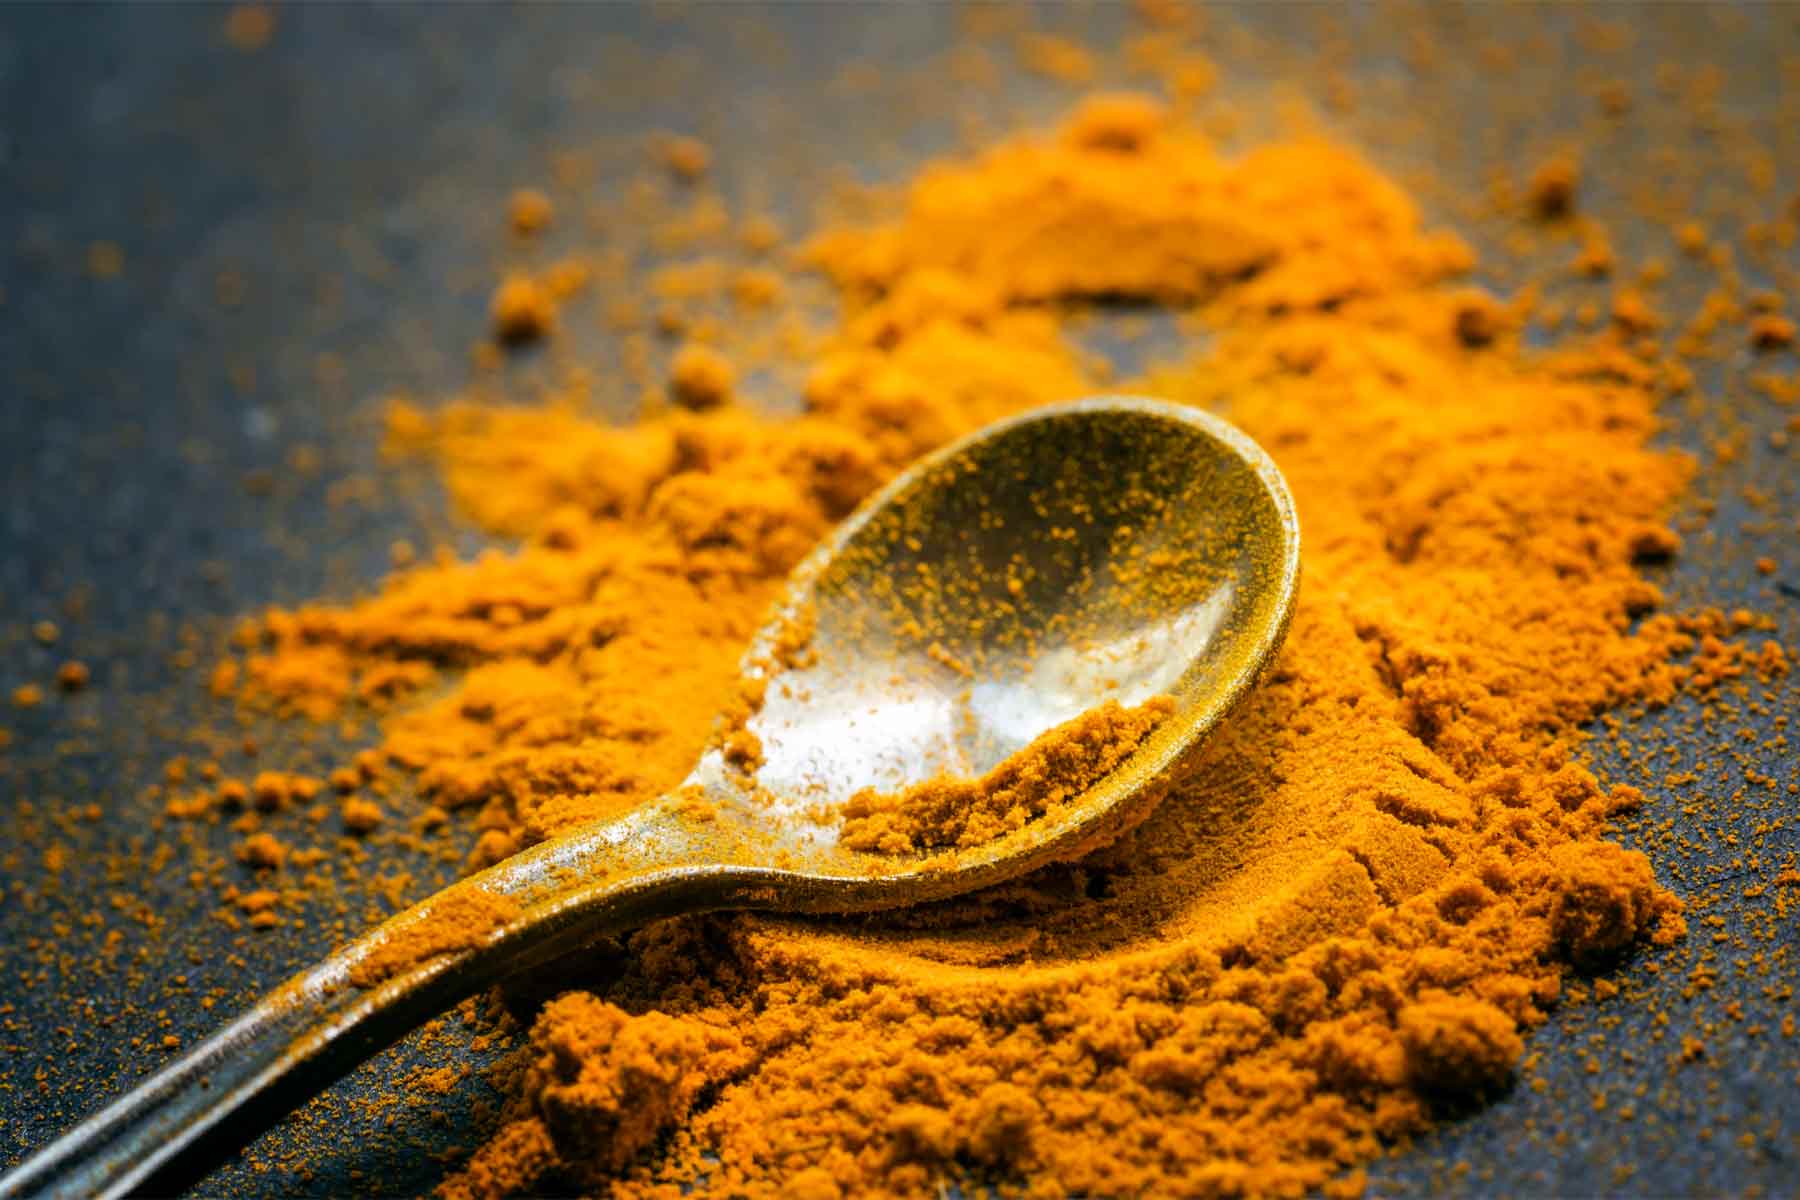 A spoon laying in a pile of turmeric.